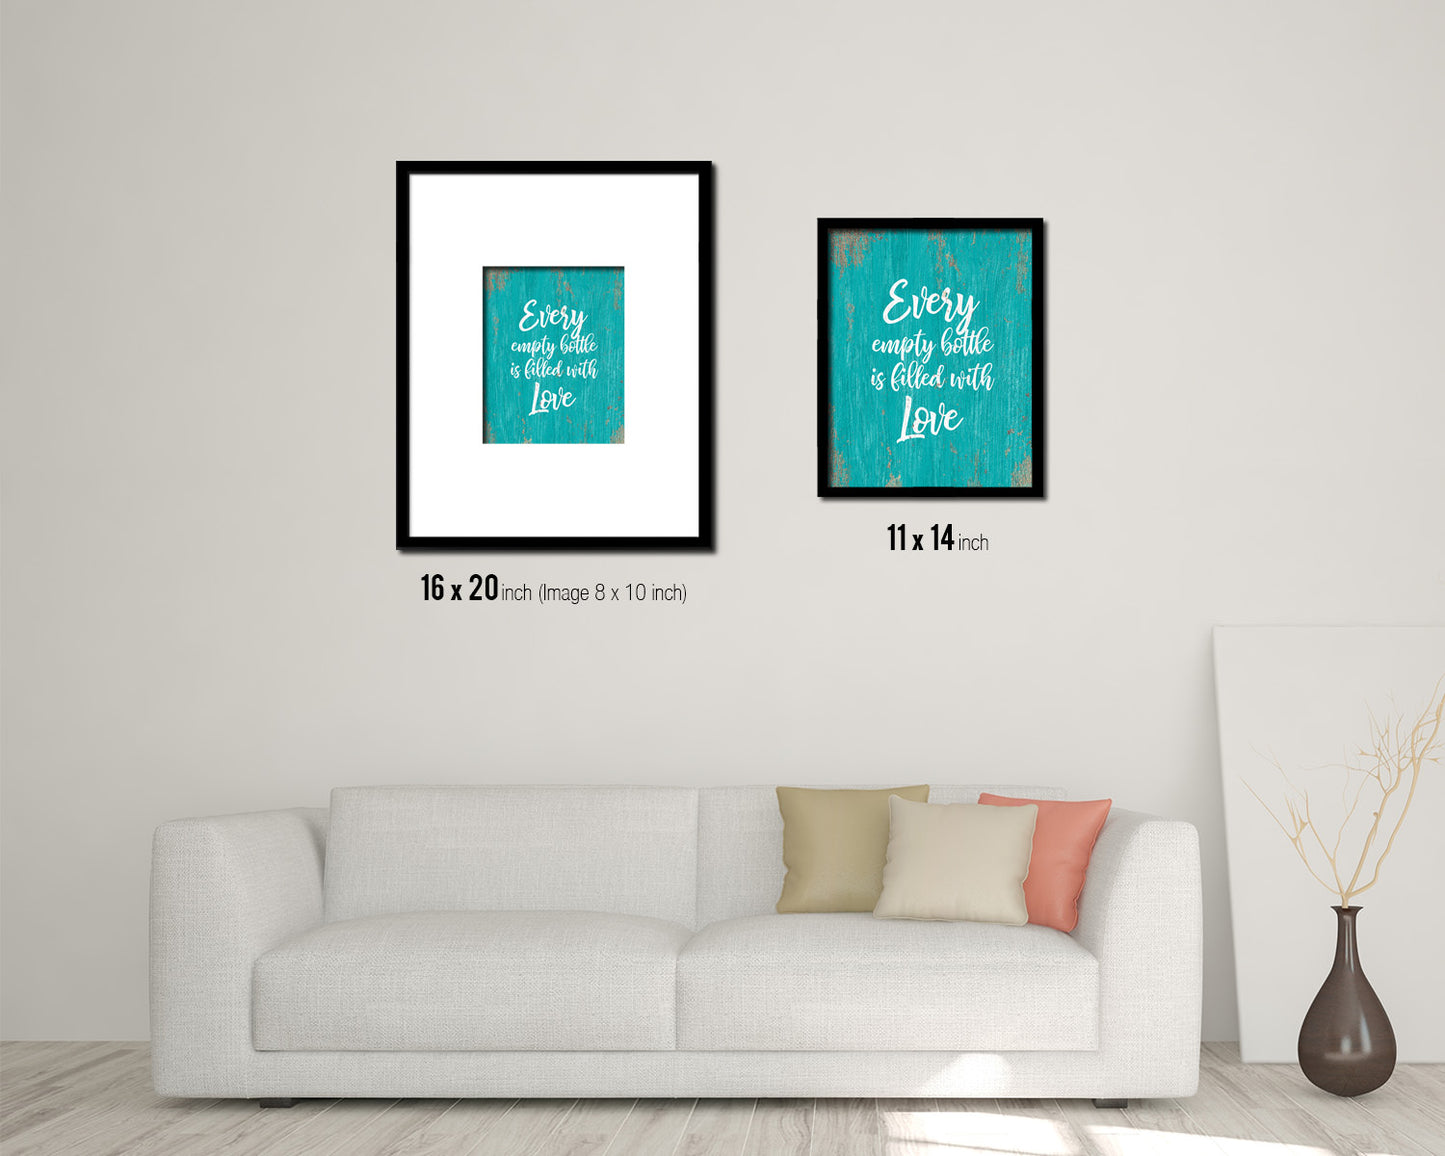 Every empty bottle Is filled with love Quotes Framed Print Home Decor Wall Art Gifts